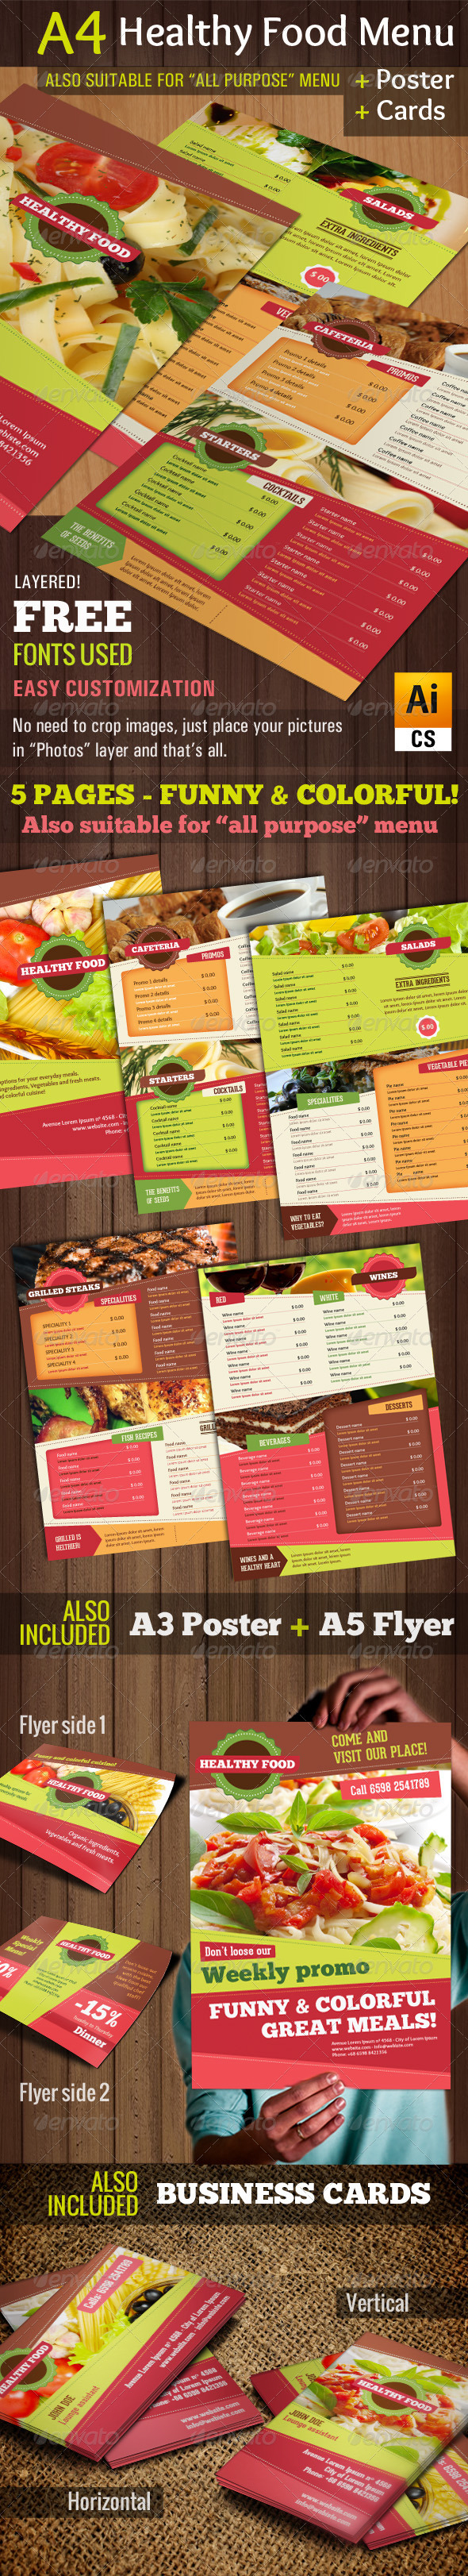 A4 Healthy Food Menu + Poster + Flyer + Cards